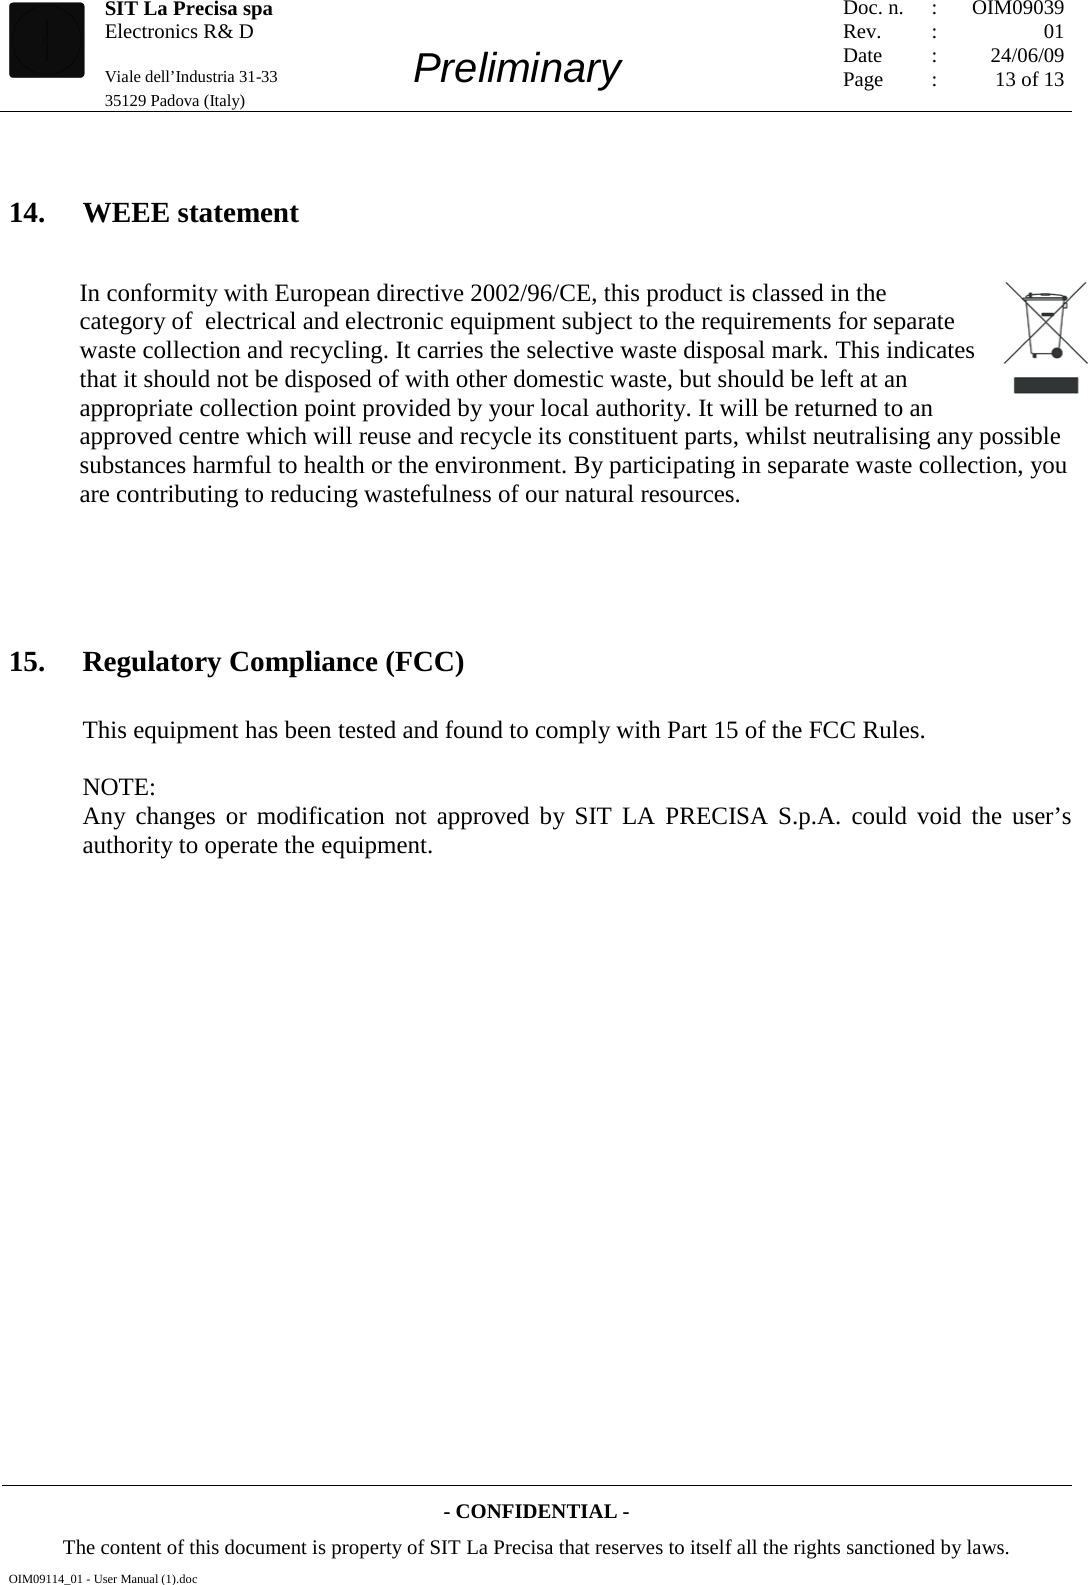   SIT La Precisa spa Electronics R&amp; D                                    Viale dell’Industria 31-33         Preliminary 35129 Padova (Italy)         Doc. n. Rev. Date Page :  :    : : OIM09039 01 24/06/09 13 of 13  - CONFIDENTIAL - The content of this document is property of SIT La Precisa that reserves to itself all the rights sanctioned by laws. OIM09114_01 - User Manual (1).doc  14. WEEE statement In conformity with European directive 2002/96/CE, this product is classed in the category of  electrical and electronic equipment subject to the requirements for separate waste collection and recycling. It carries the selective waste disposal mark. This indicates that it should not be disposed of with other domestic waste, but should be left at an appropriate collection point provided by your local authority. It will be returned to an approved centre which will reuse and recycle its constituent parts, whilst neutralising any possible substances harmful to health or the environment. By participating in separate waste collection, you are contributing to reducing wastefulness of our natural resources.    15. Regulatory Compliance (FCC) This equipment has been tested and found to comply with Part 15 of the FCC Rules.   NOTE:  Any changes or modification not approved by SIT LA PRECISA S.p.A. could void the user’s authority to operate the equipment.    